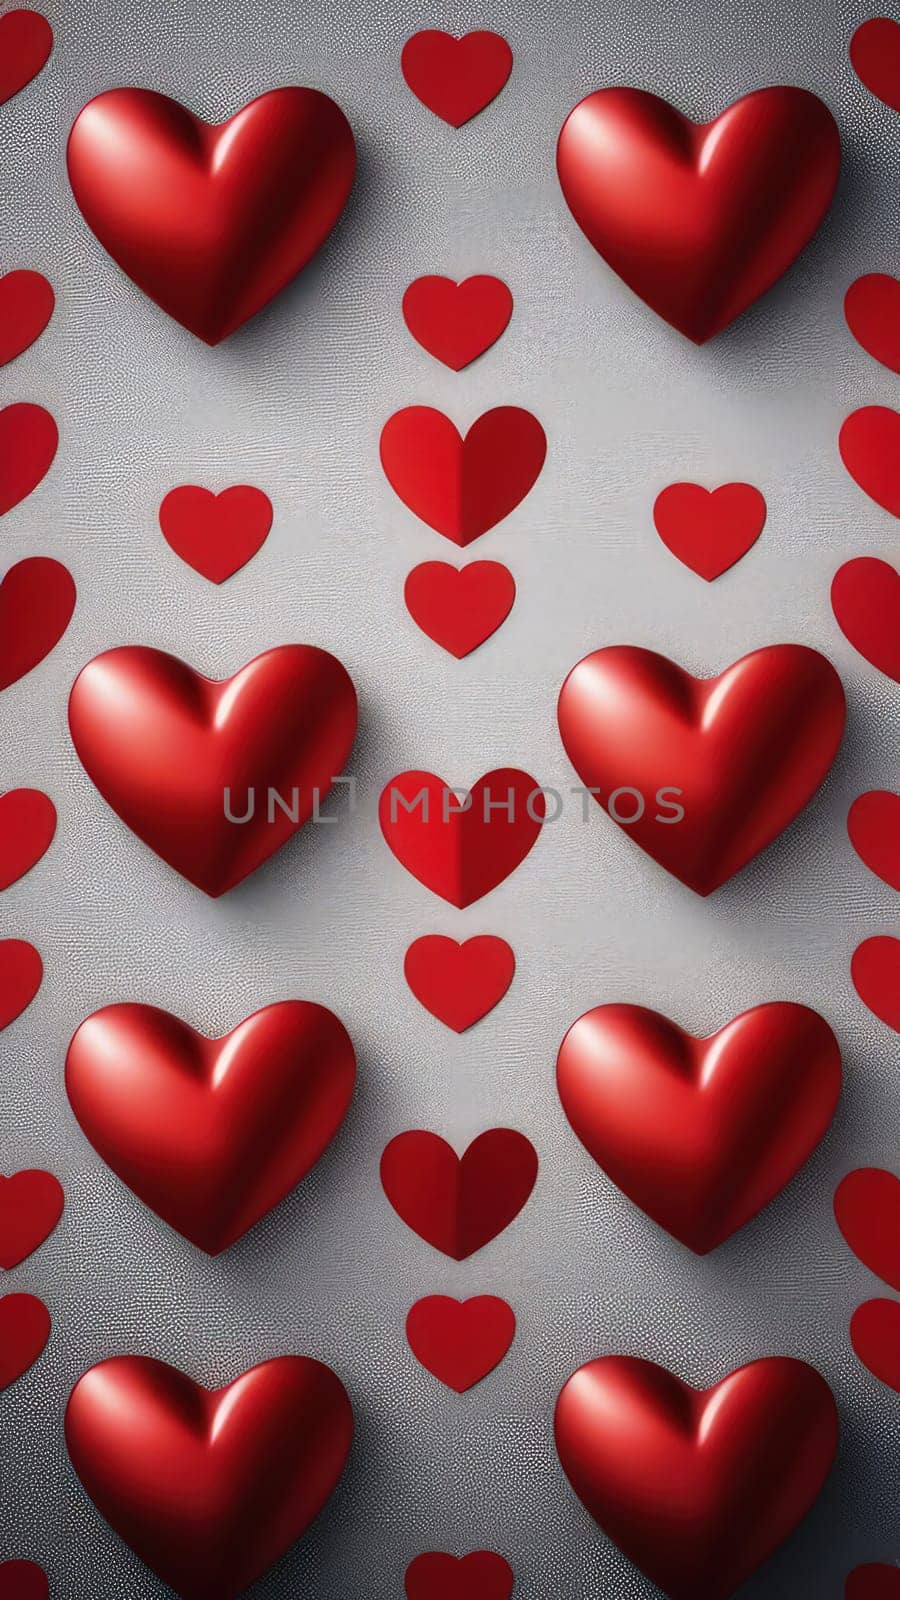 St. Valentines day, wedding vertical banner of red voluminous hearts. Use for love sale banner, voucher, wrapping paper.,Concept love. Beautiful love hearts background for valentines day greeting card